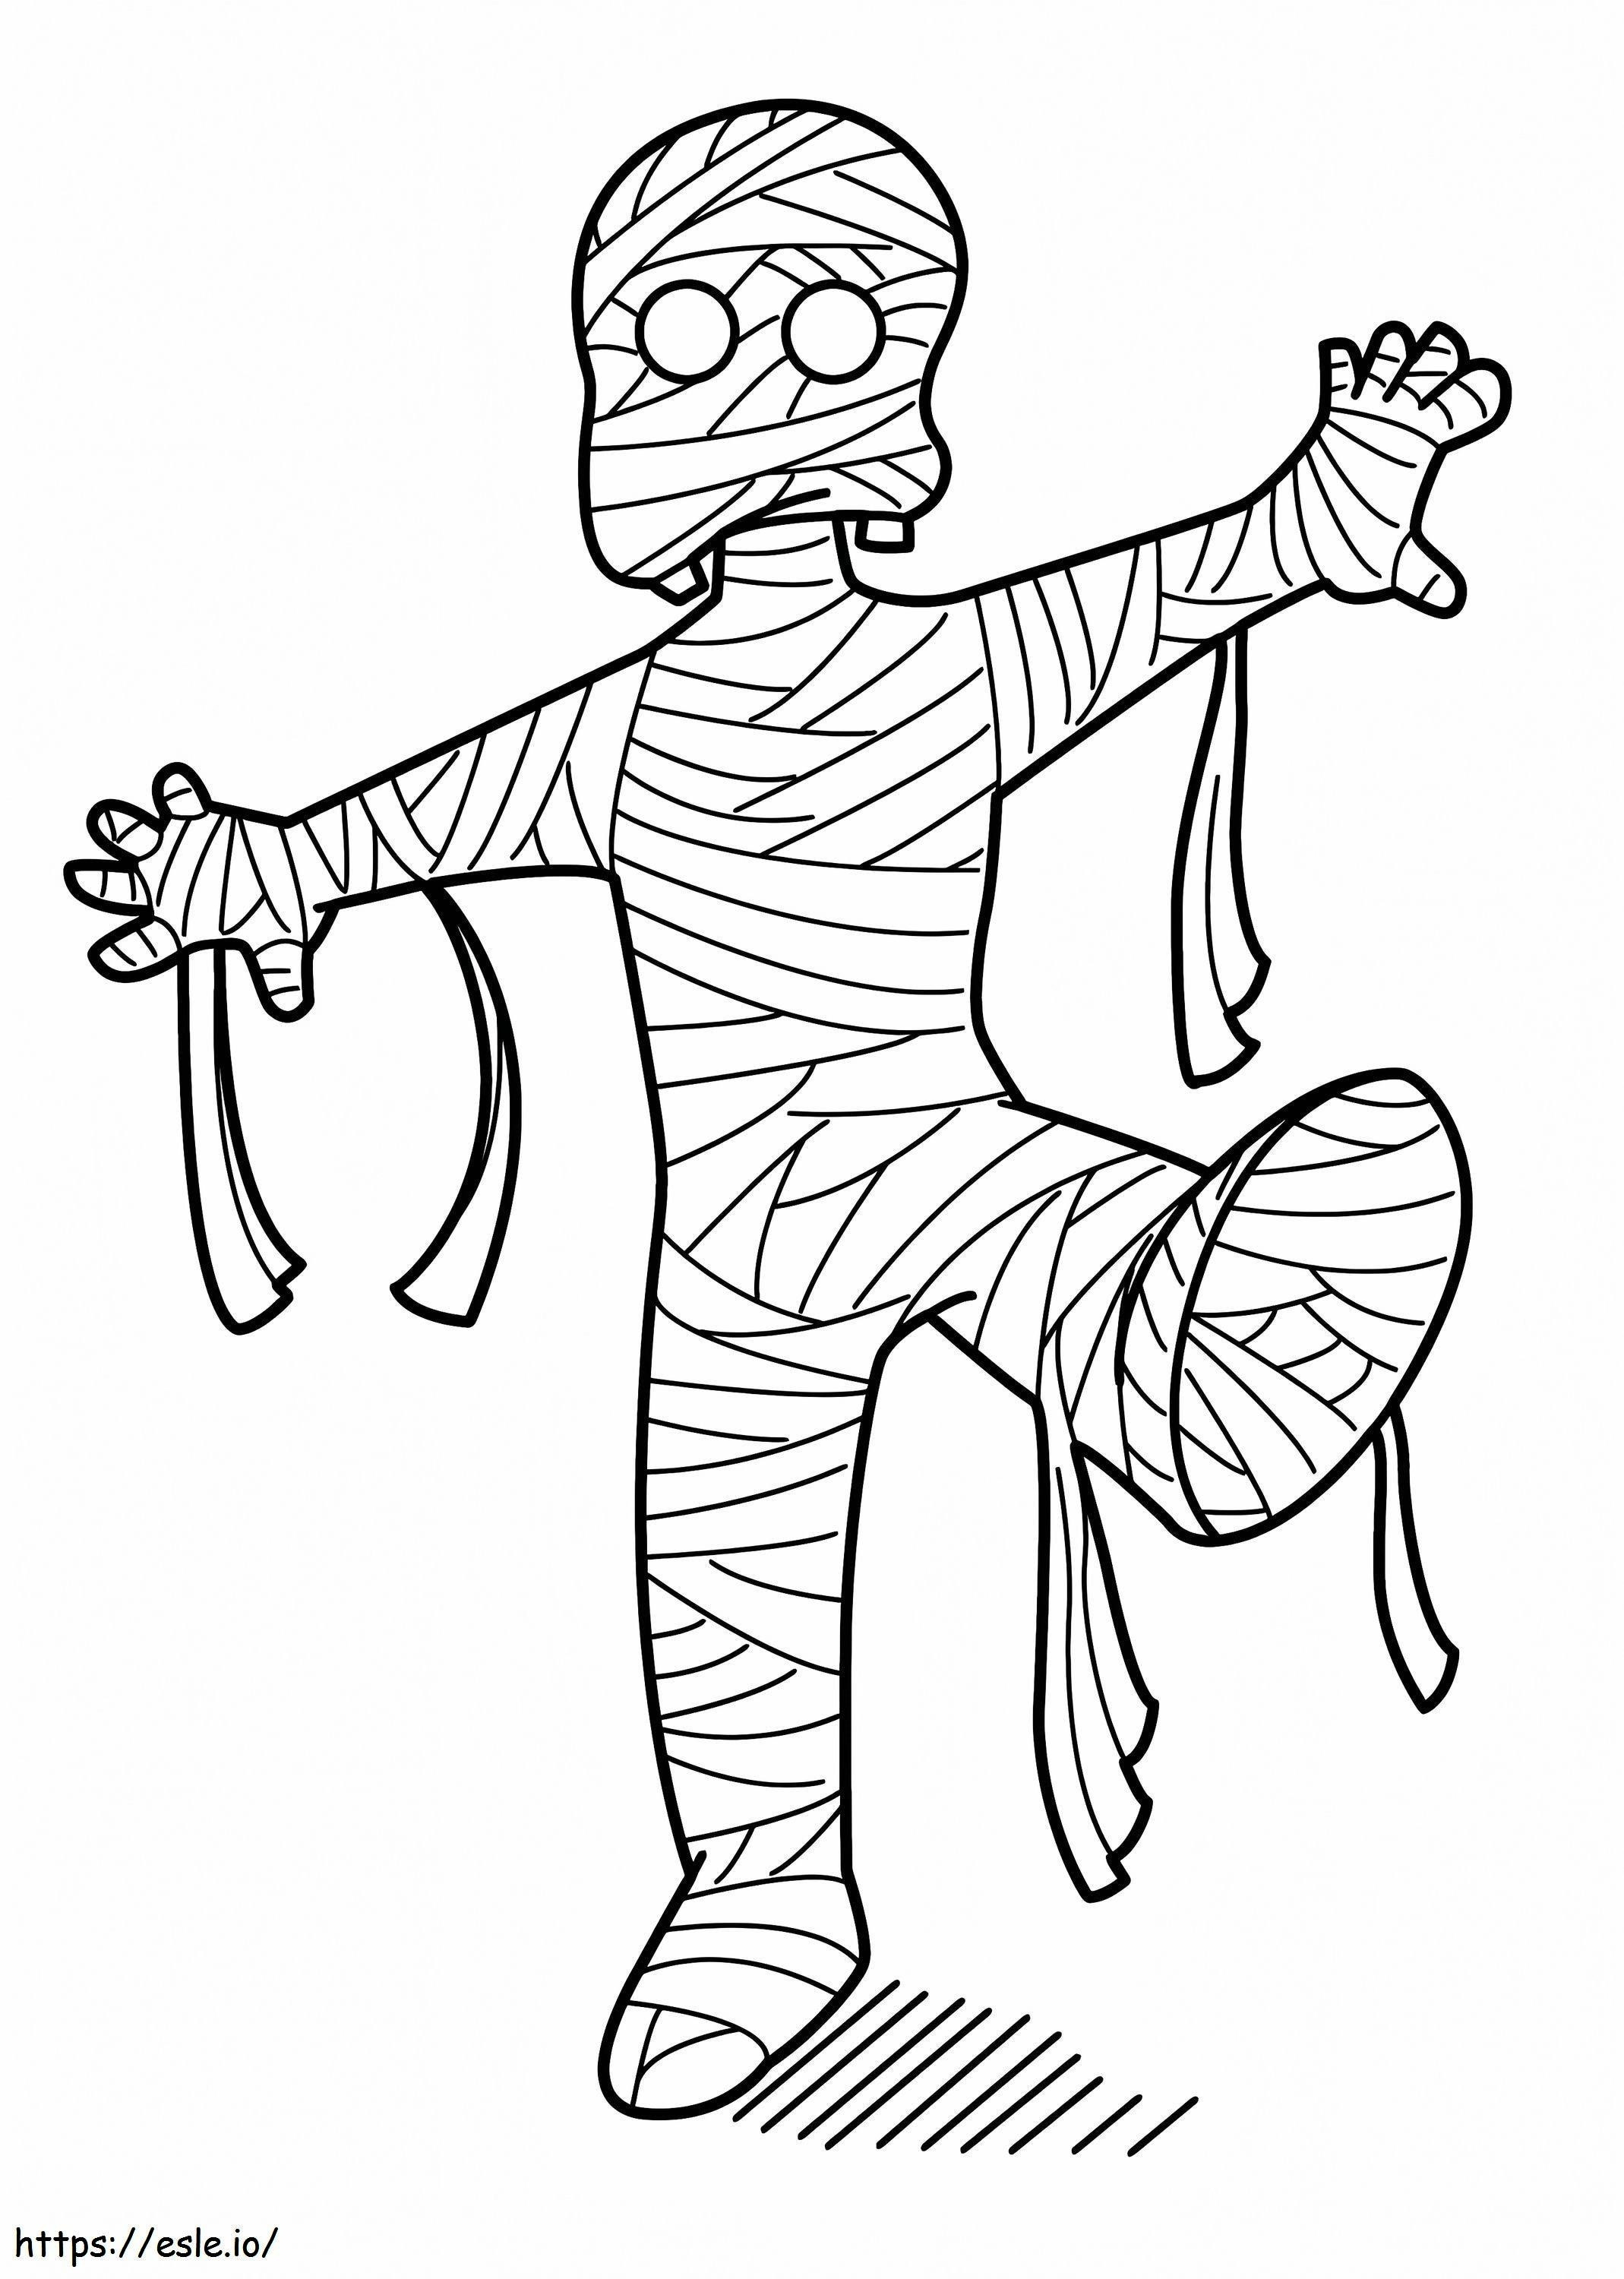 A Mummy Coloring Page coloring page